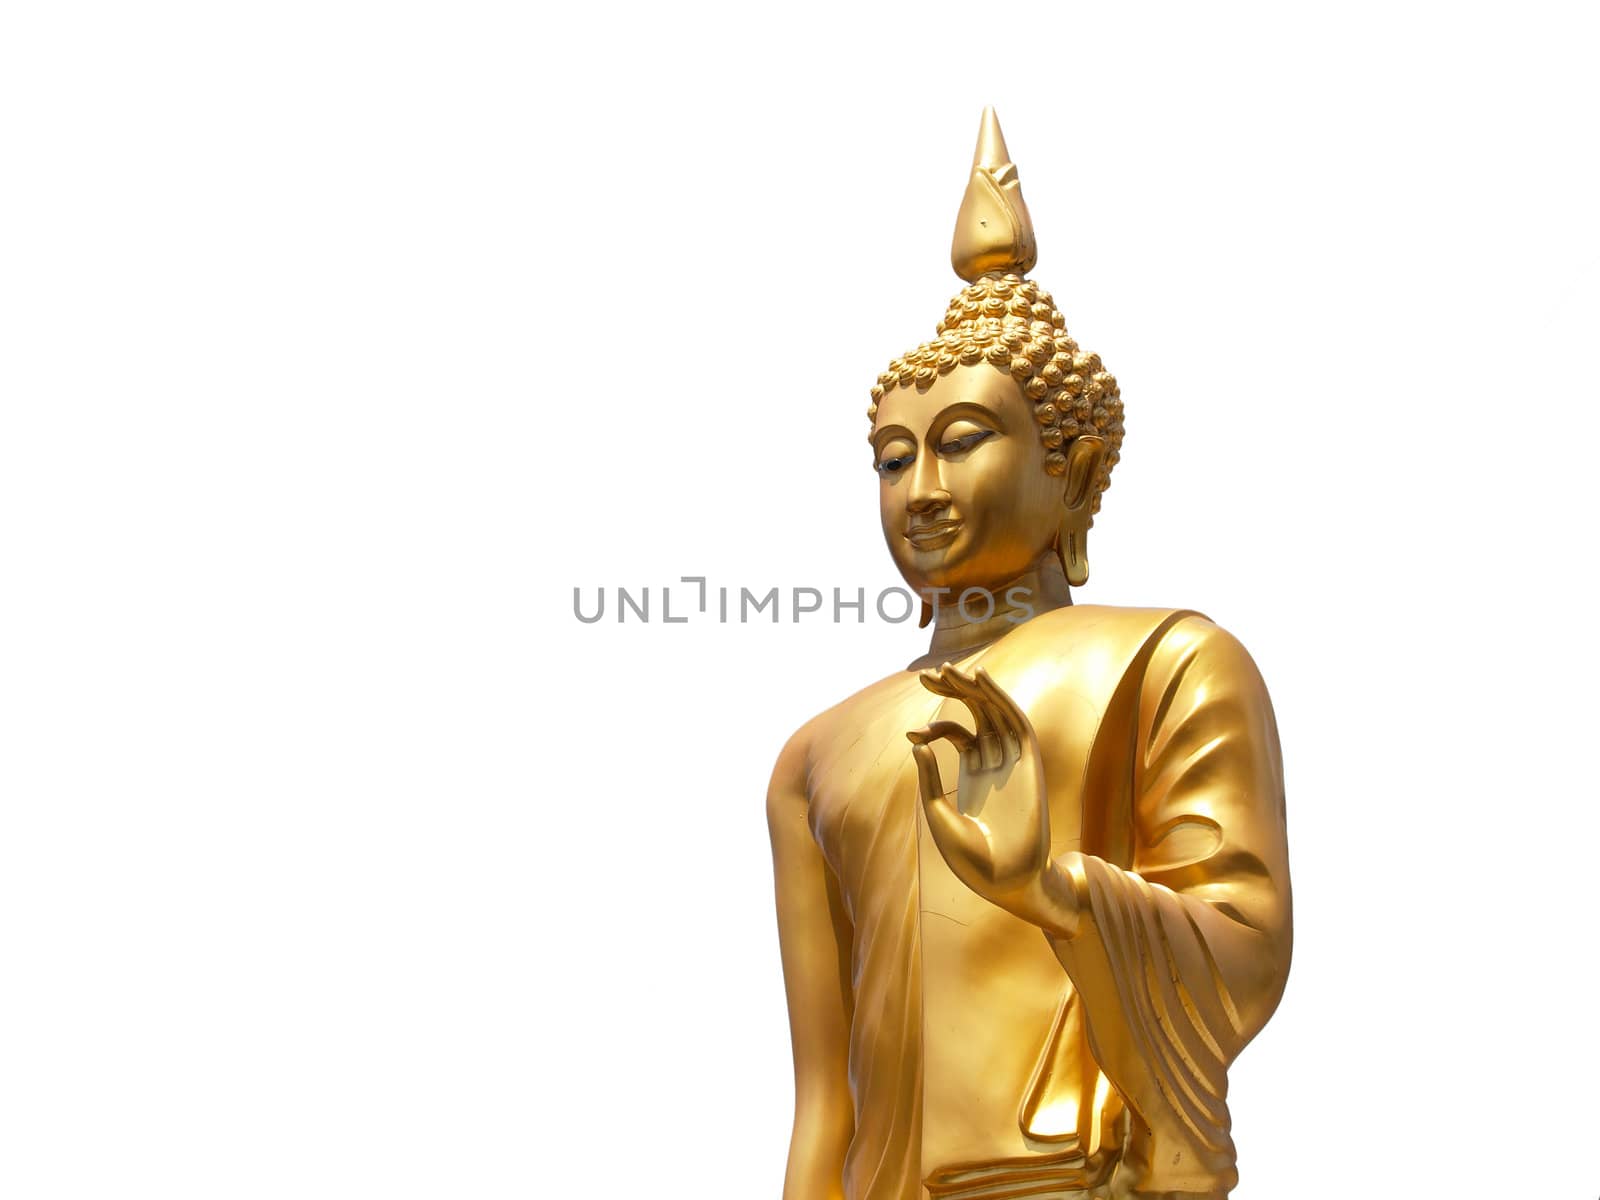 Statue of Buddha in Thailand on white background by jakgree